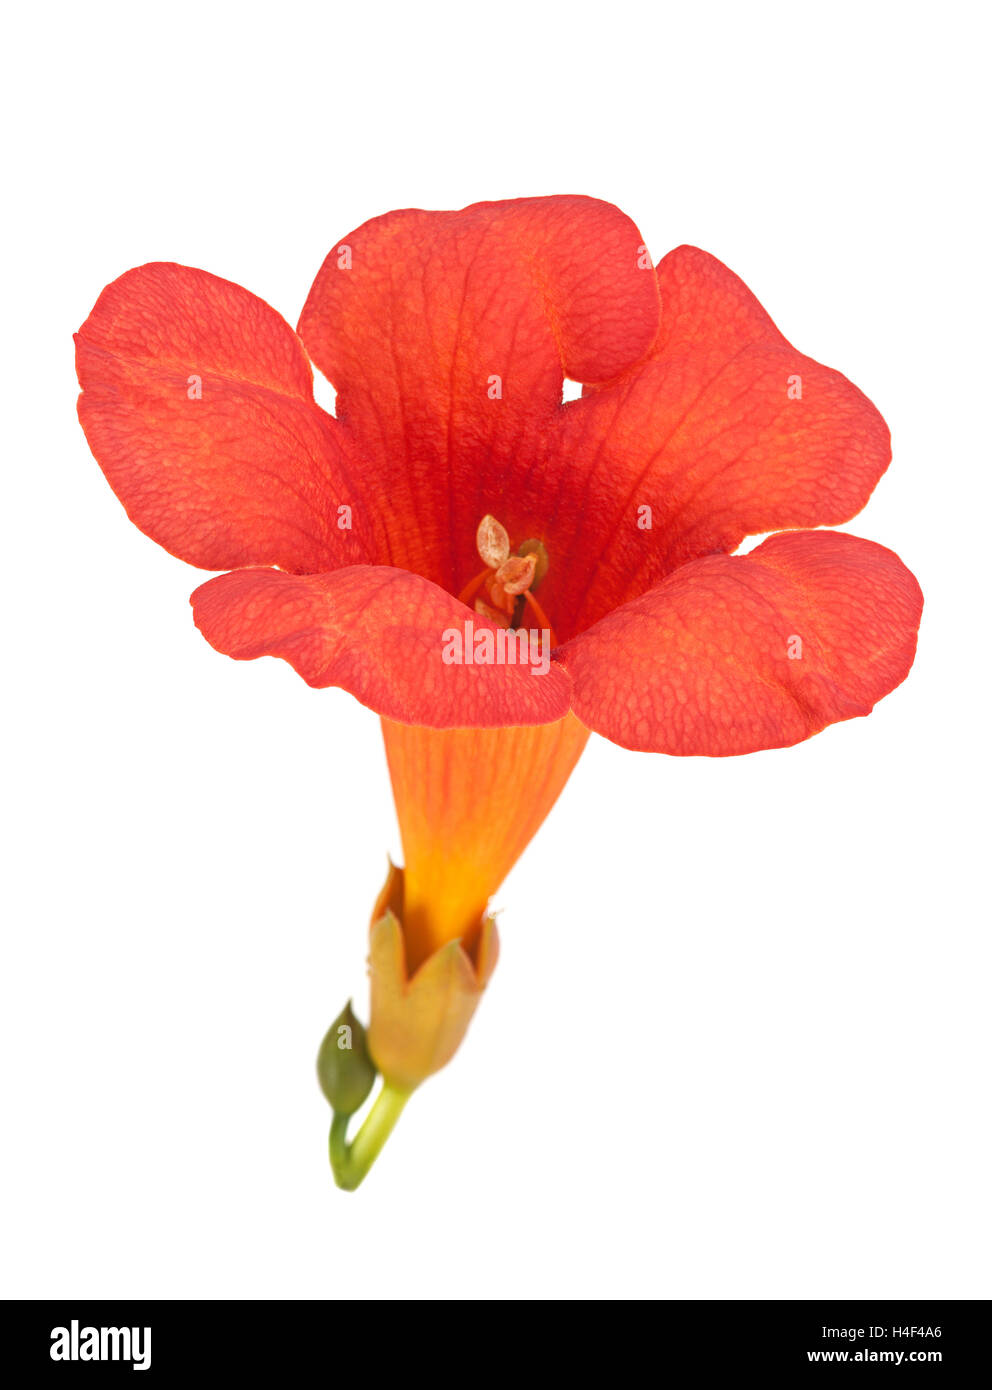 Trumpet creeper flower closeup isolated on white Stock Photo